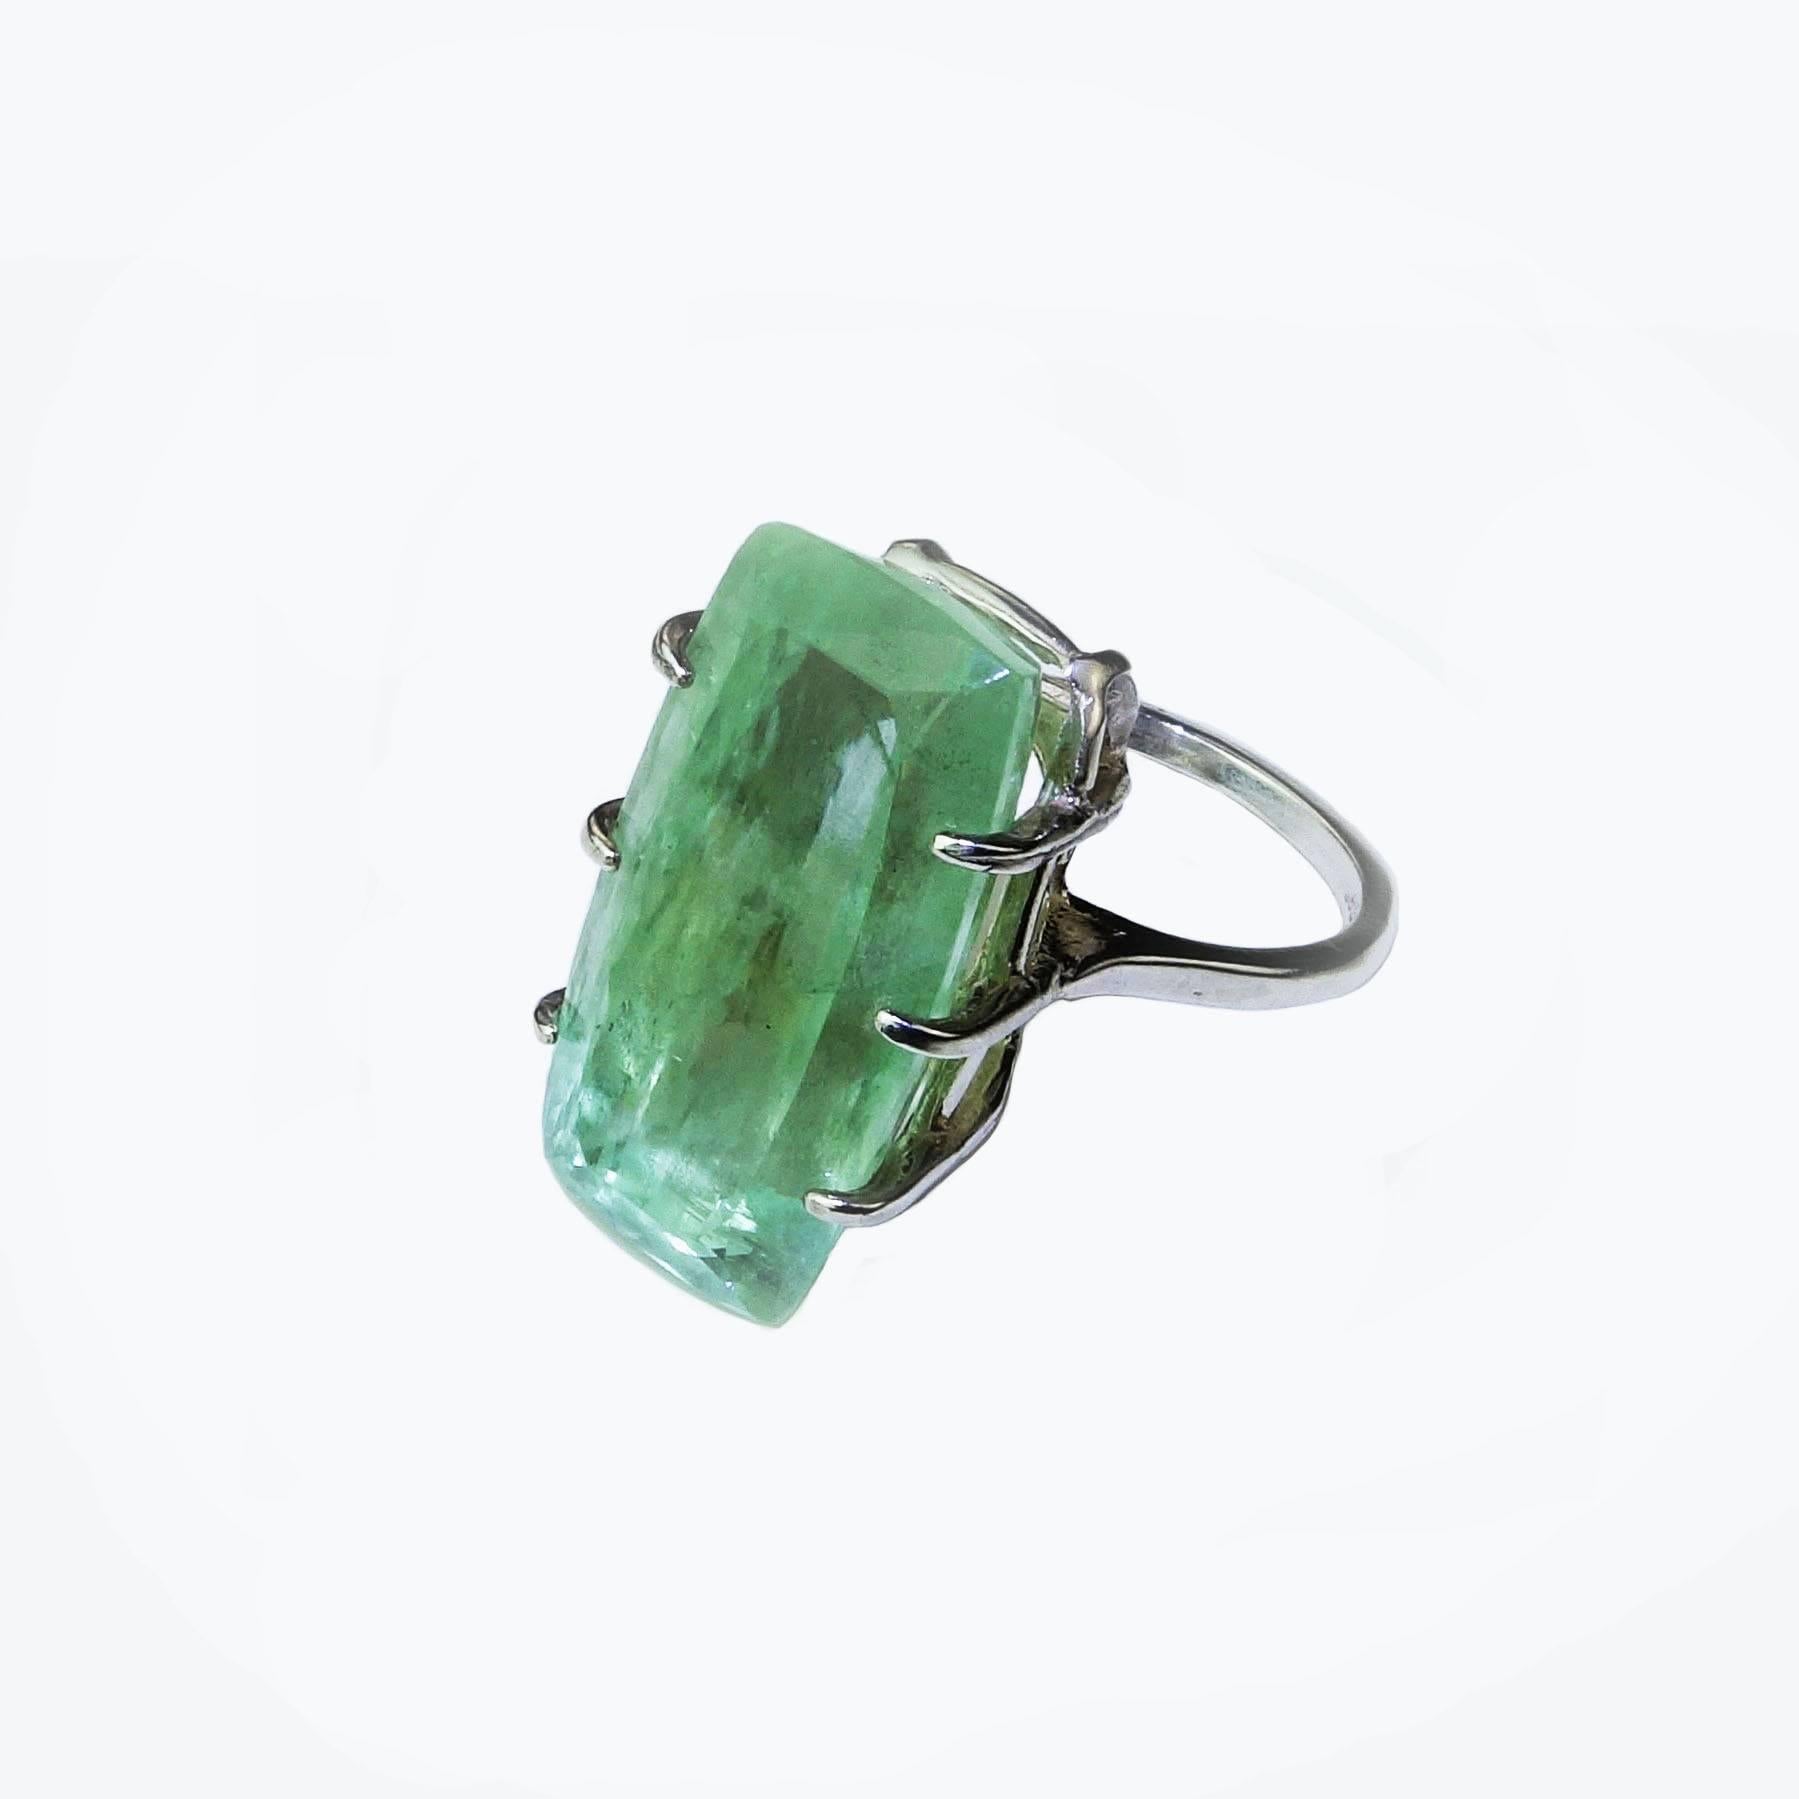 Custom made cocktail ring in Sterling Silver cradling large (25x14mm) rectangular Green Beryl. This lovely Green Beryl sits fairly high on the finger as a Statement ring should. The color is soft and warm, just as you wish a Green Beryl to be. This